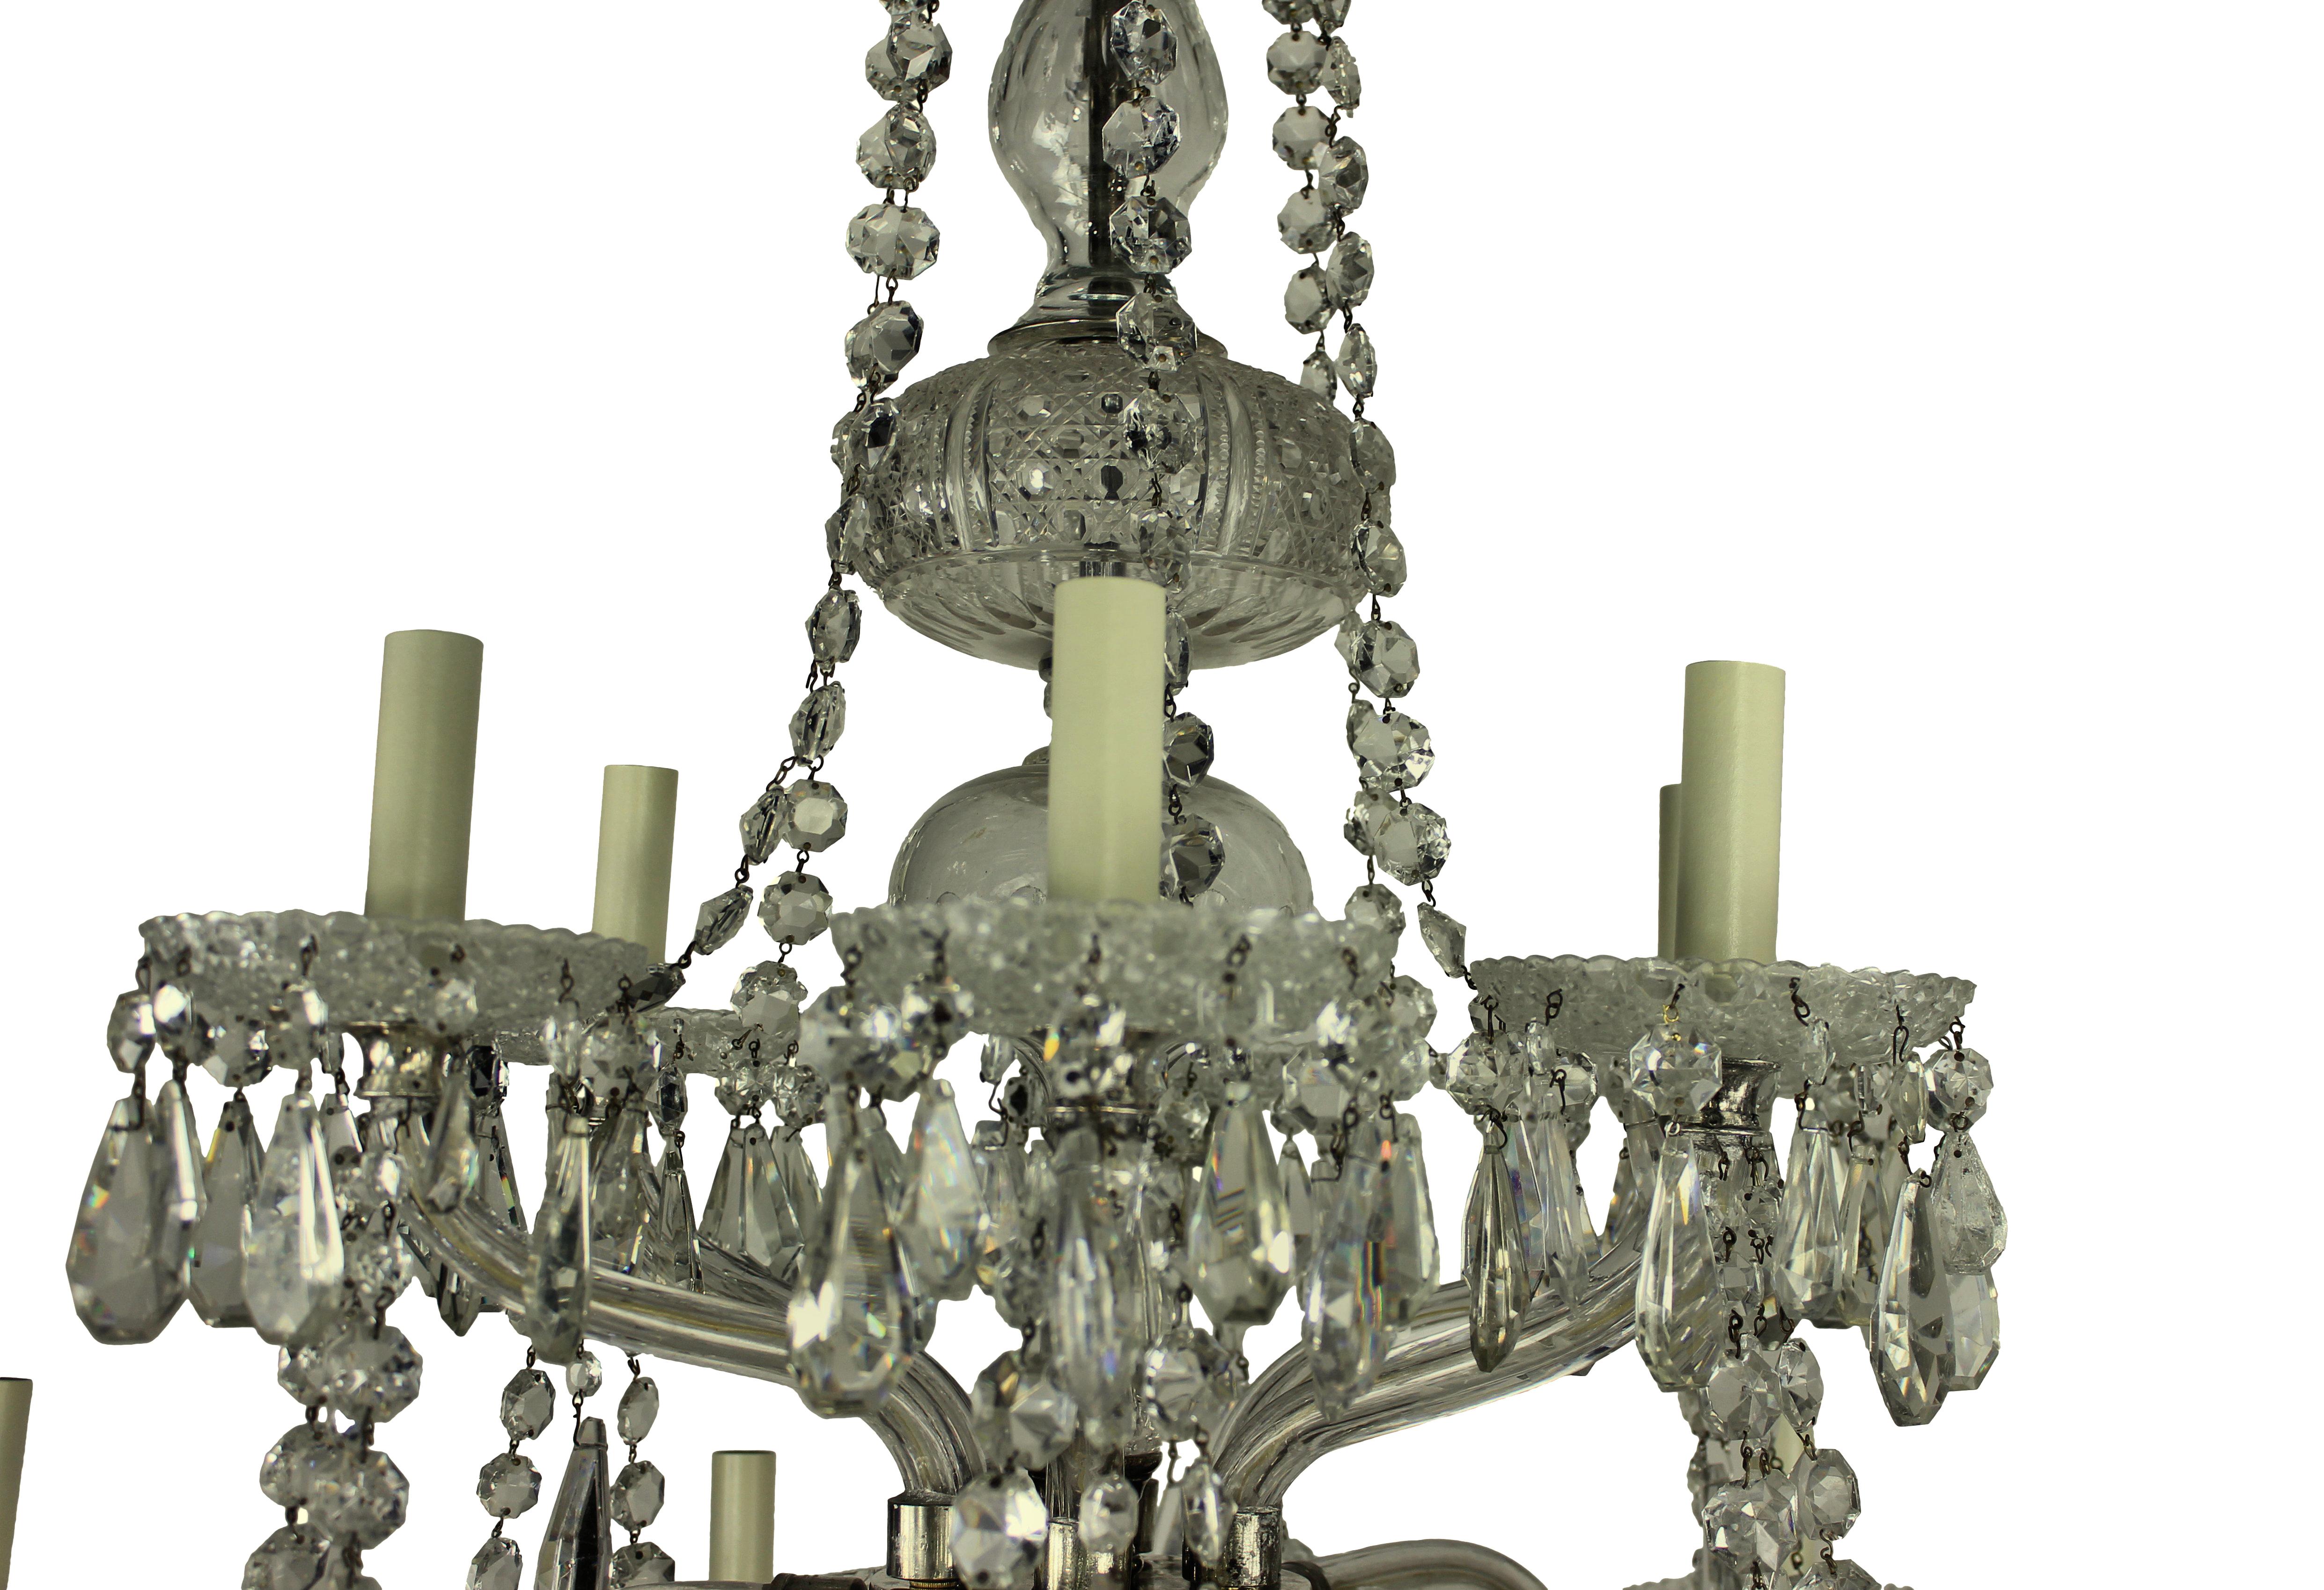 A large English cut-glass chandelier of good quality. Of six down-swept and six up-swept arms, decorated heavily with swags and pendant drops.